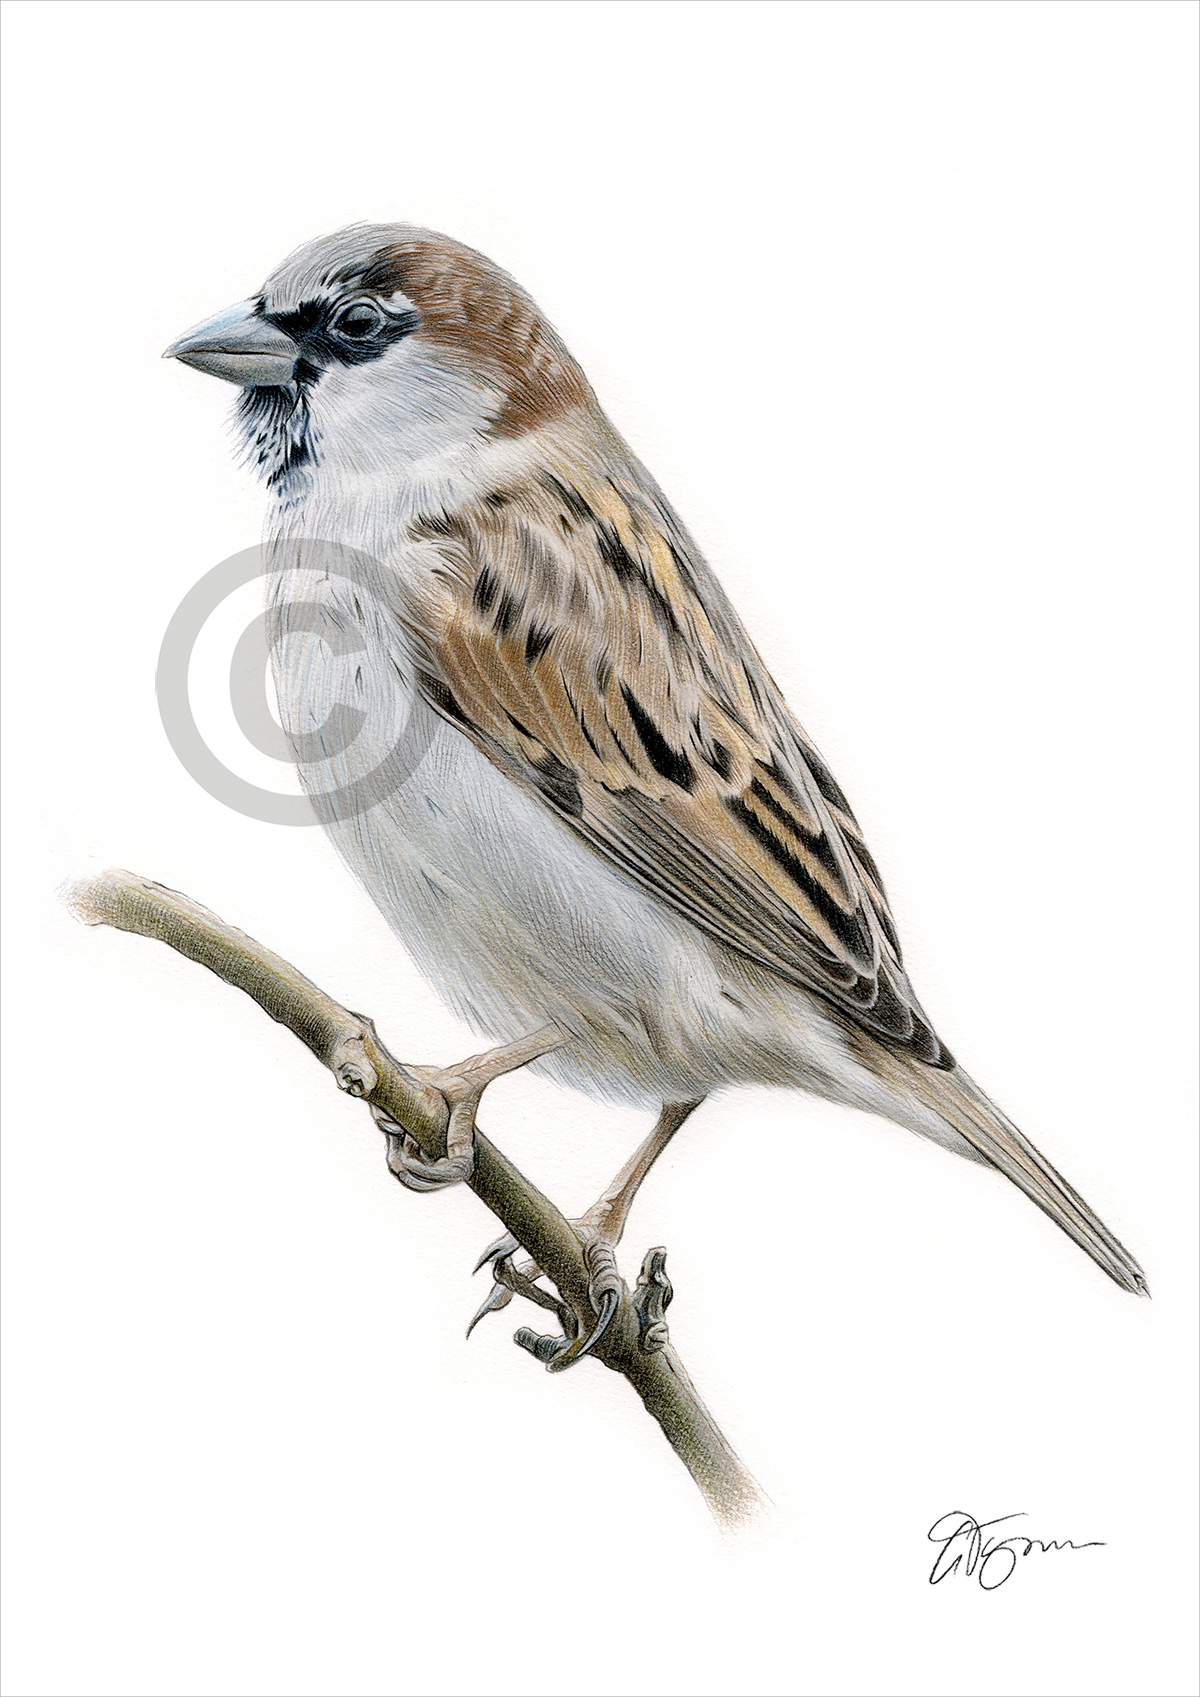 Colour pencil drawing of a male Sparrow by artist Gary Tymon